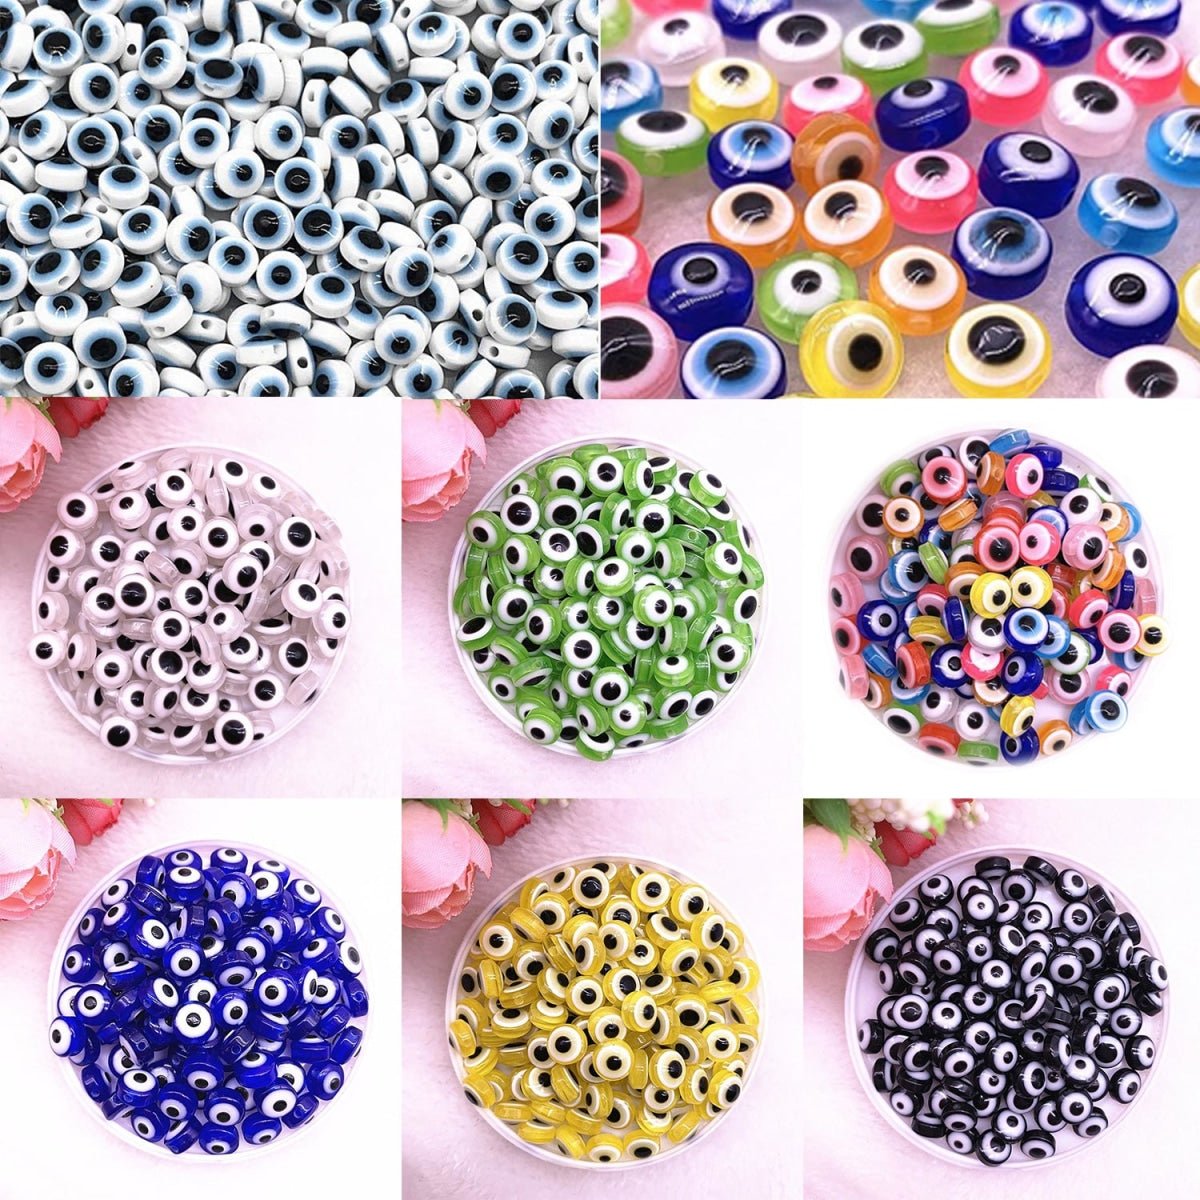 48pcs 8/10mm Oval Resin Spacer Beads Double Sided Eyes for Jewellery Making DIY Bracelet Beads Set B - Green 8mm - Asia Sell